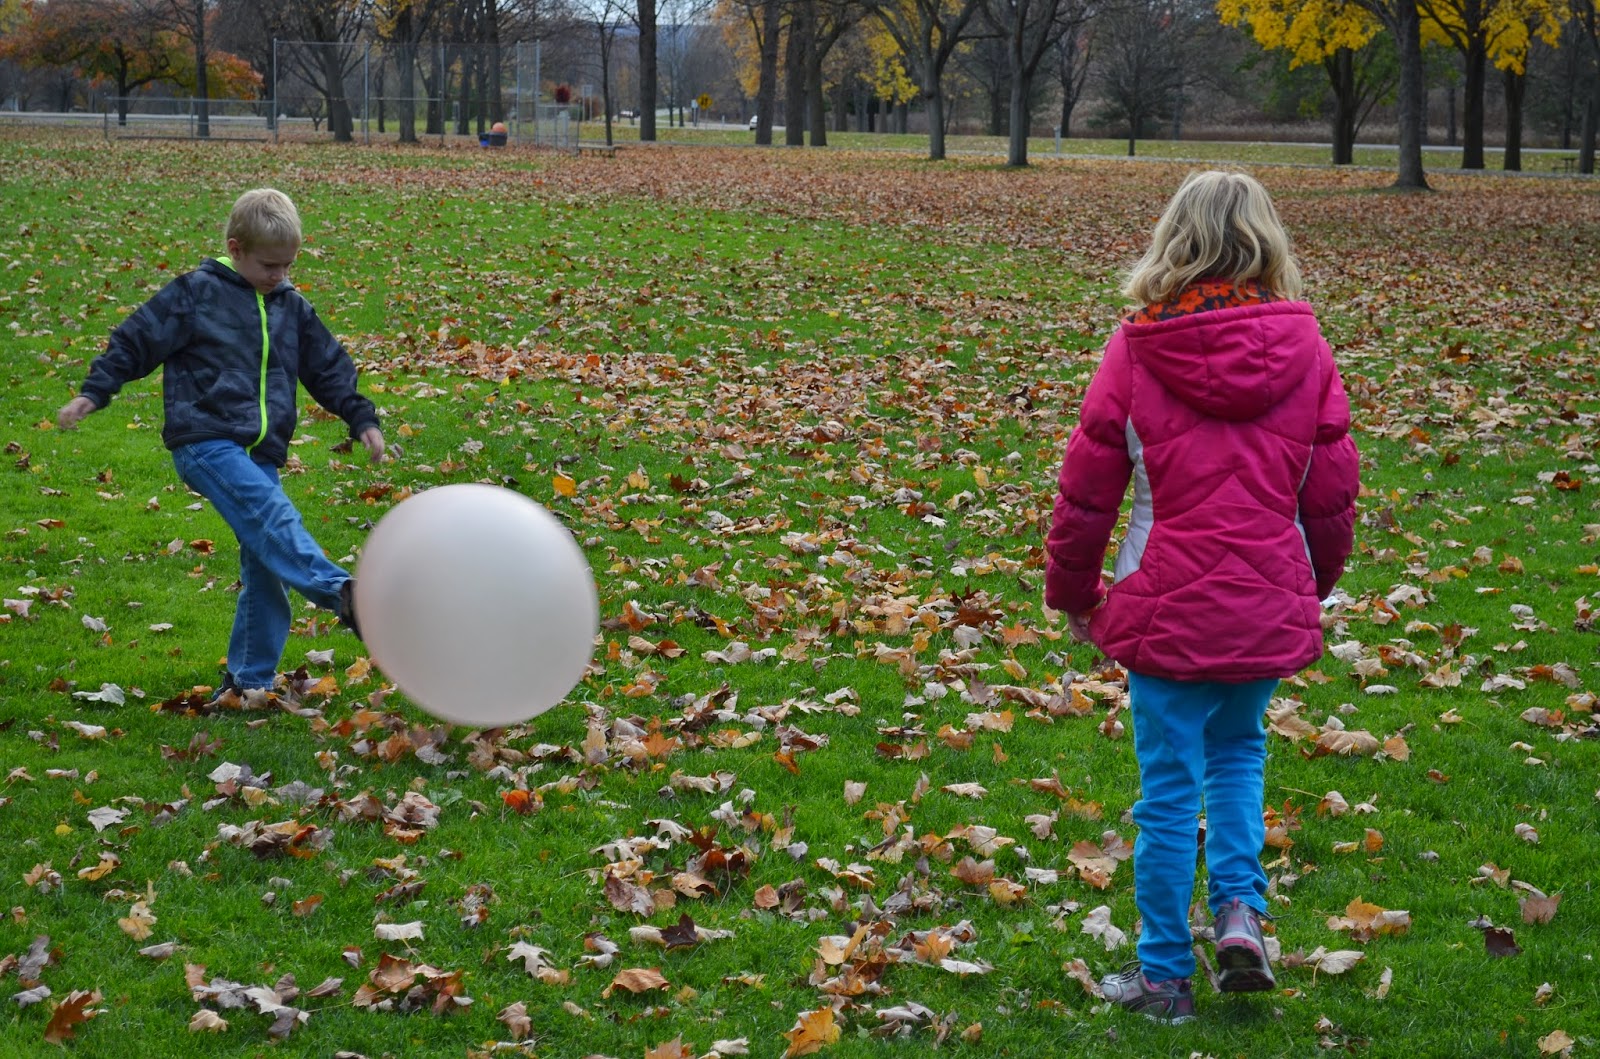 Enjoying a warm Fall day with our Wubble Ball! #wubbleball